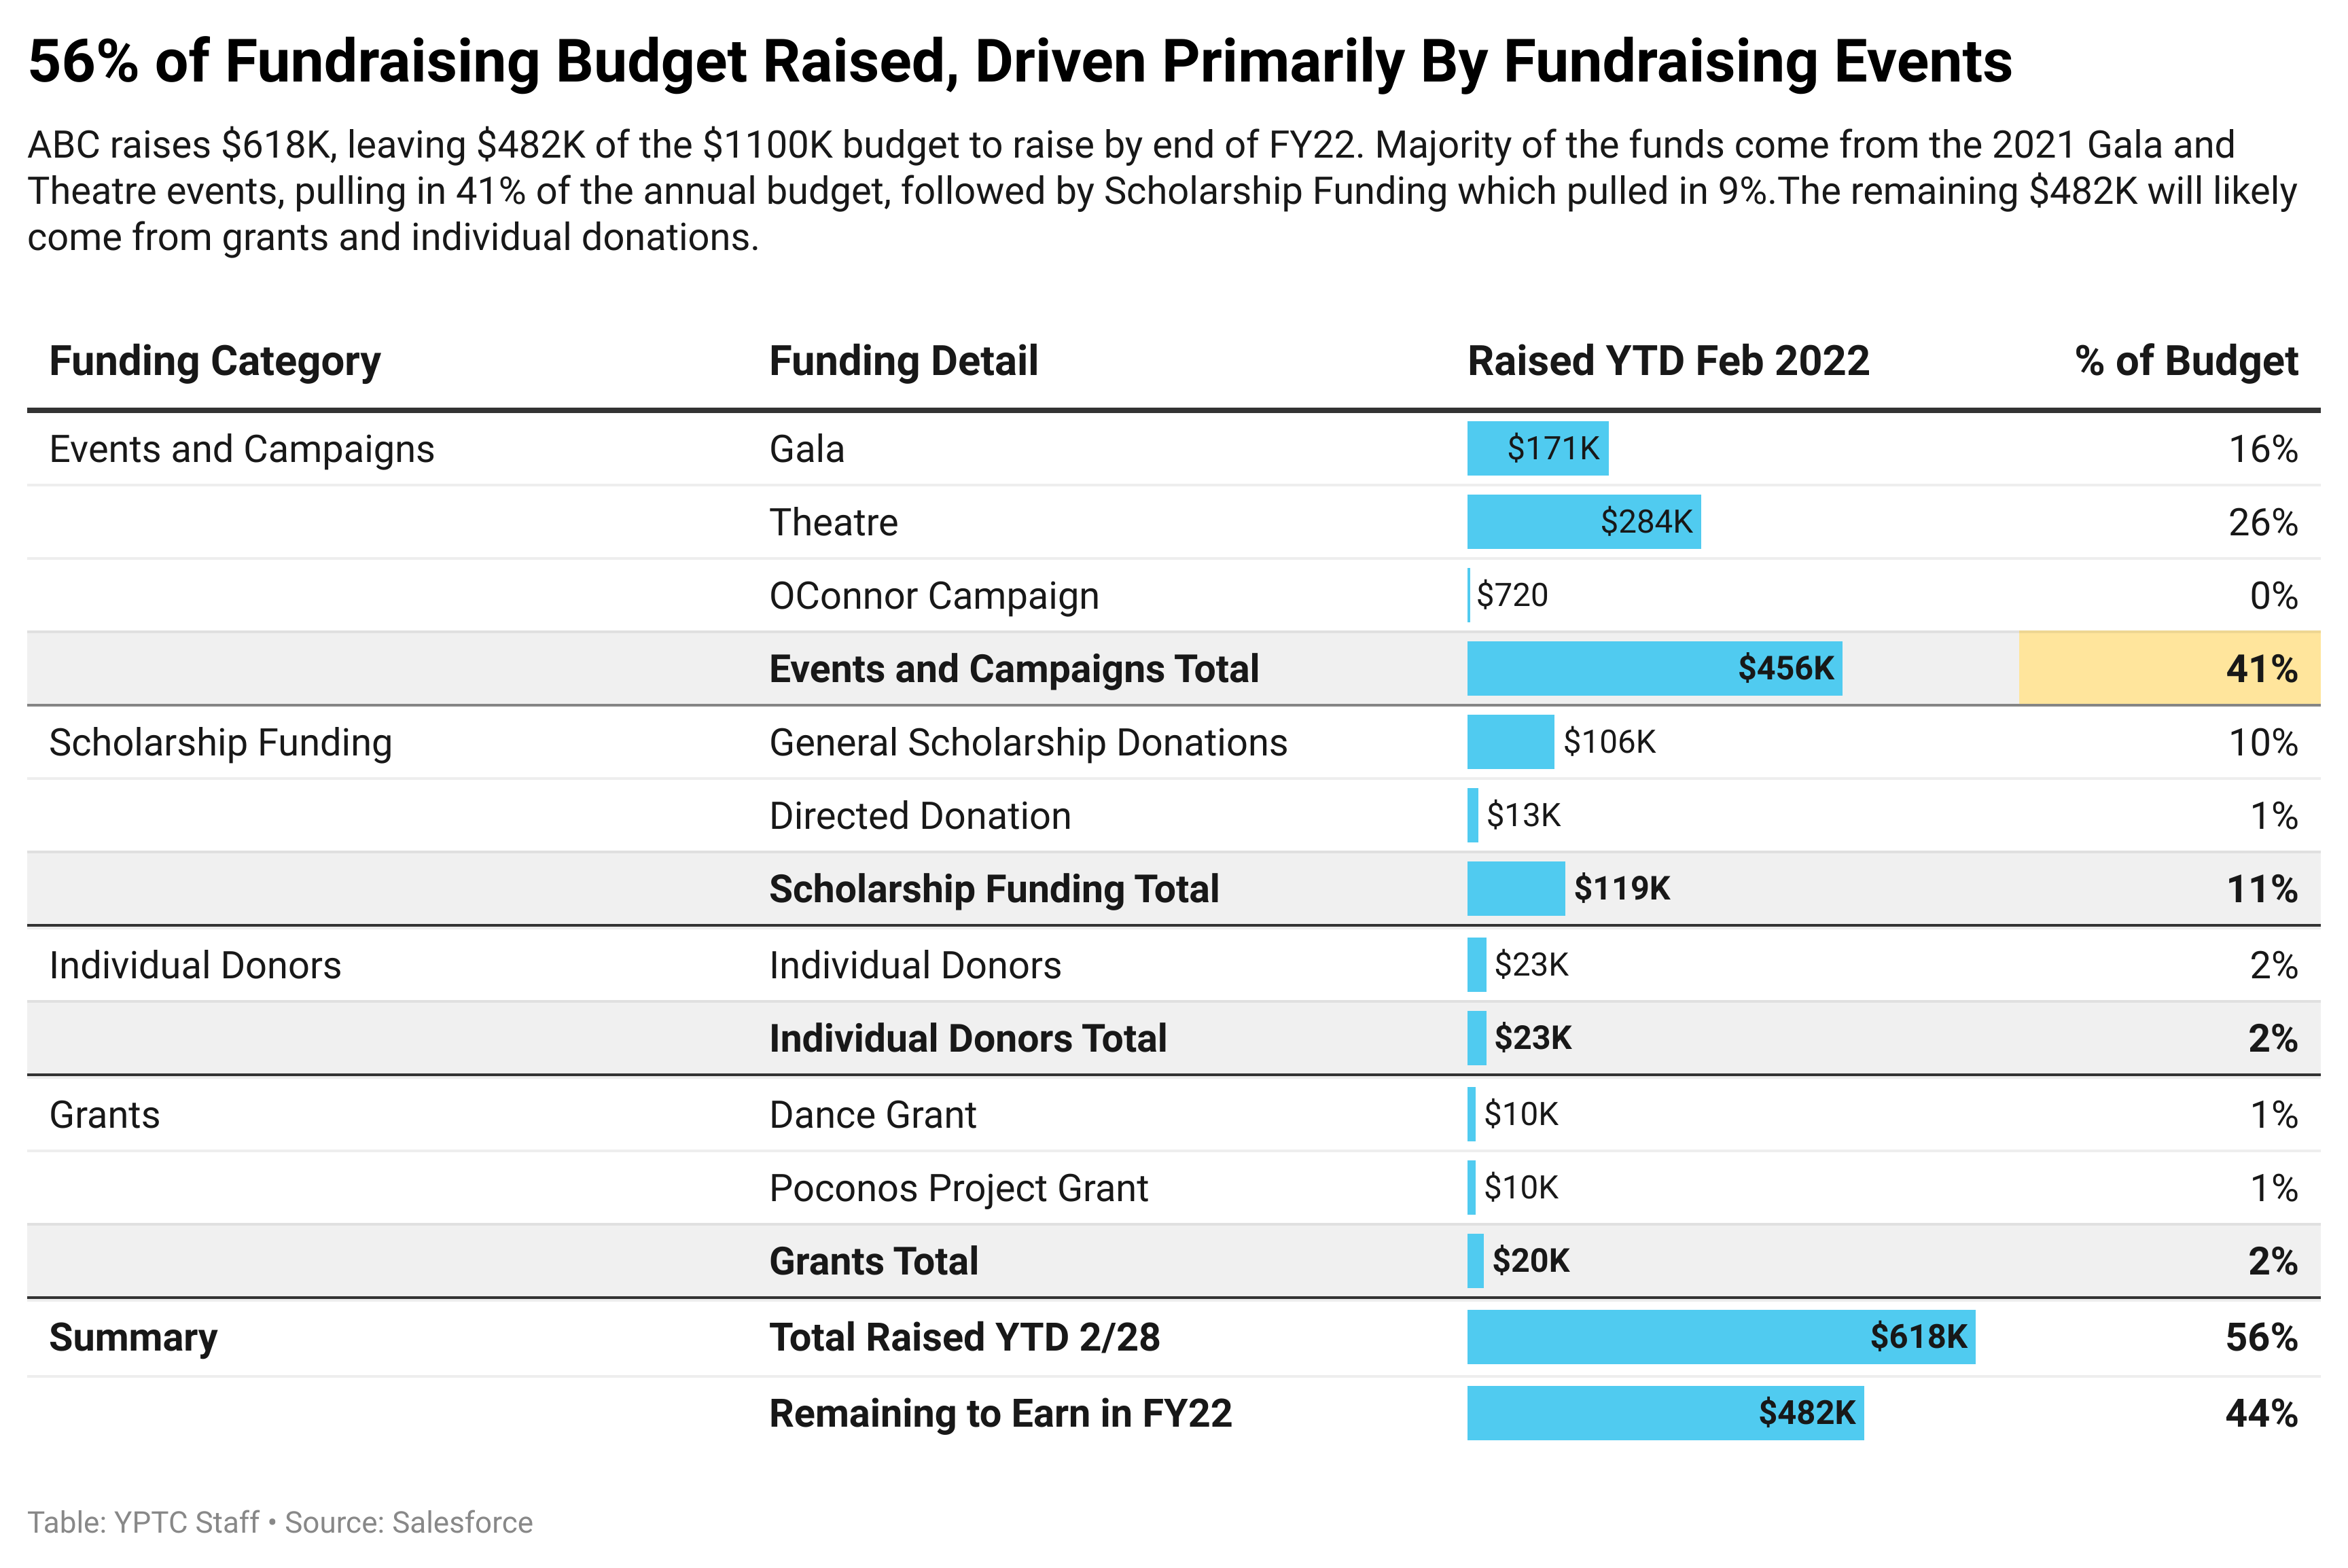 QOQef-56-of-fundraising-budget-raised-driven-primarily-by-fundraising-events-nbsp